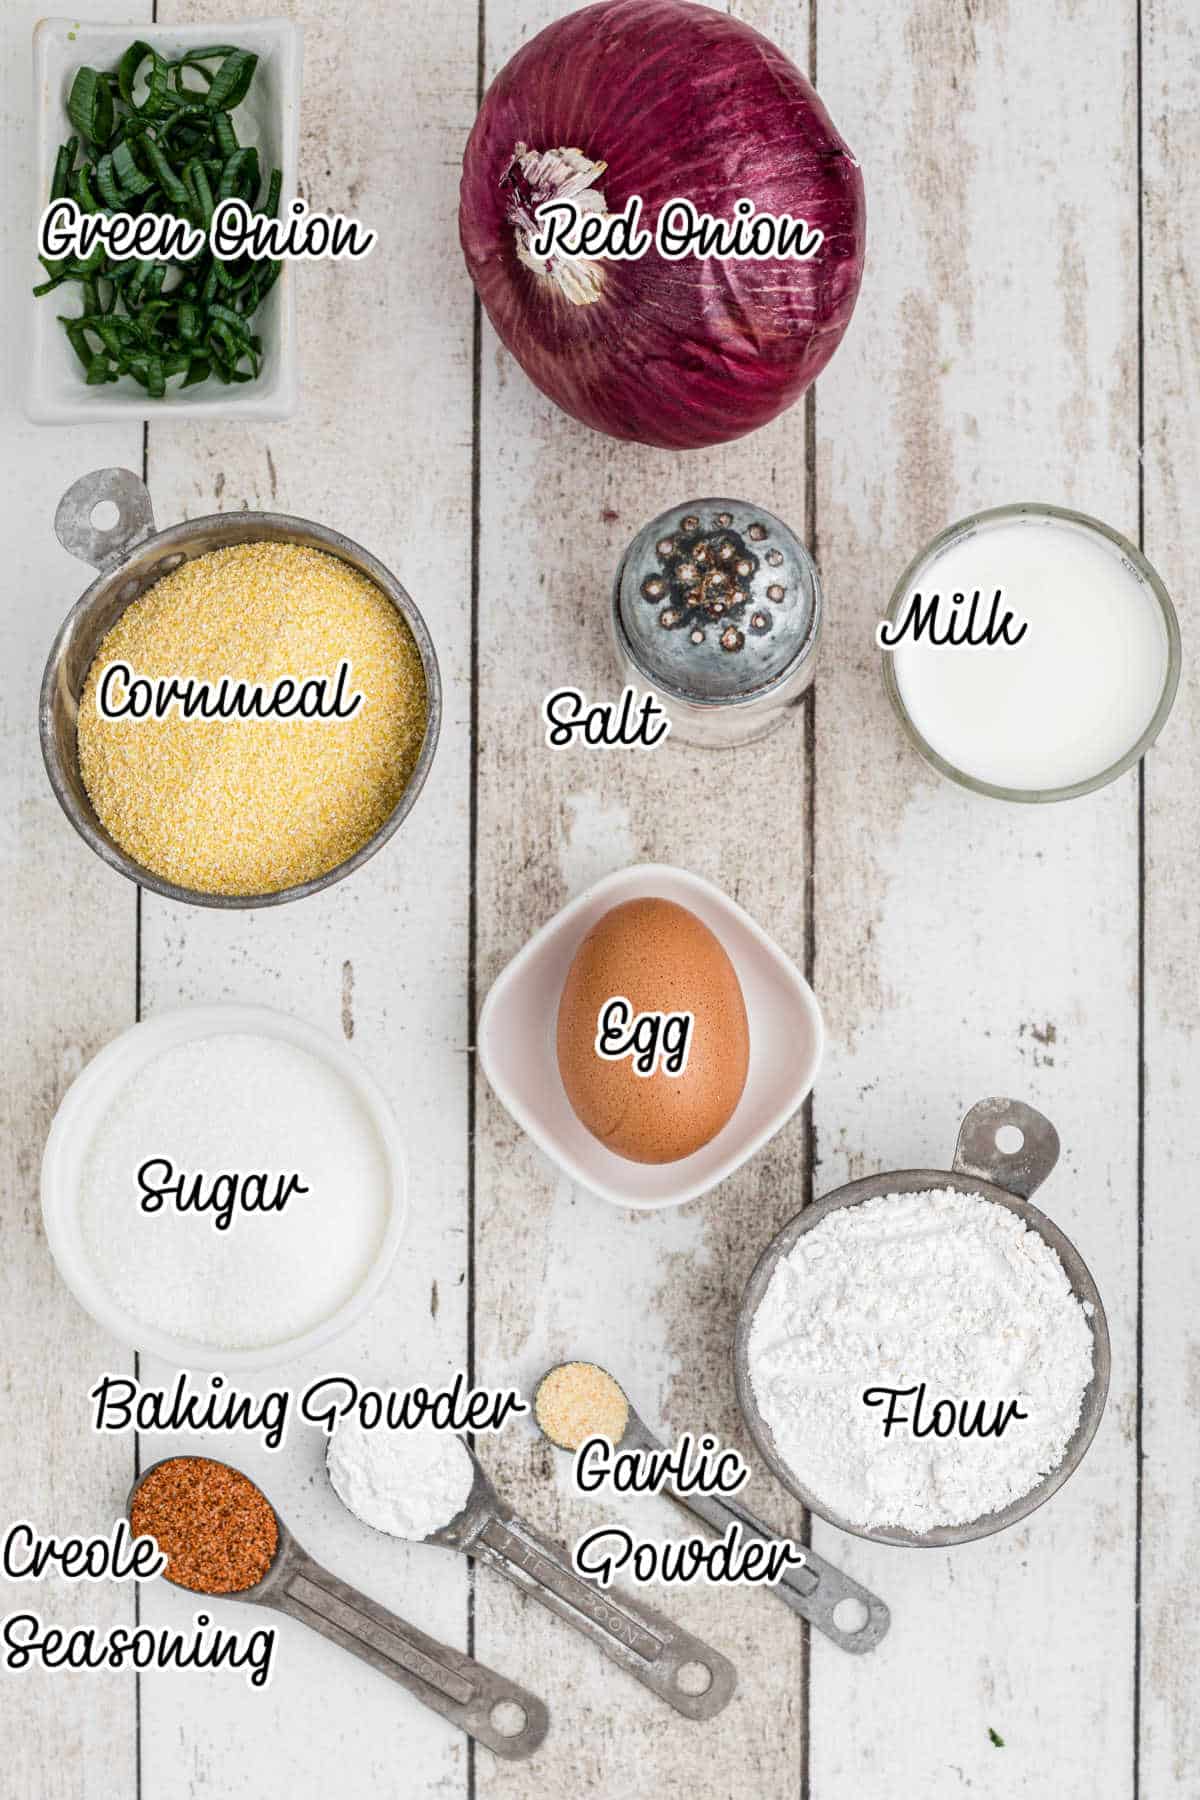 Ingredients needed to make southern sweet hush puppies, with text overlay.